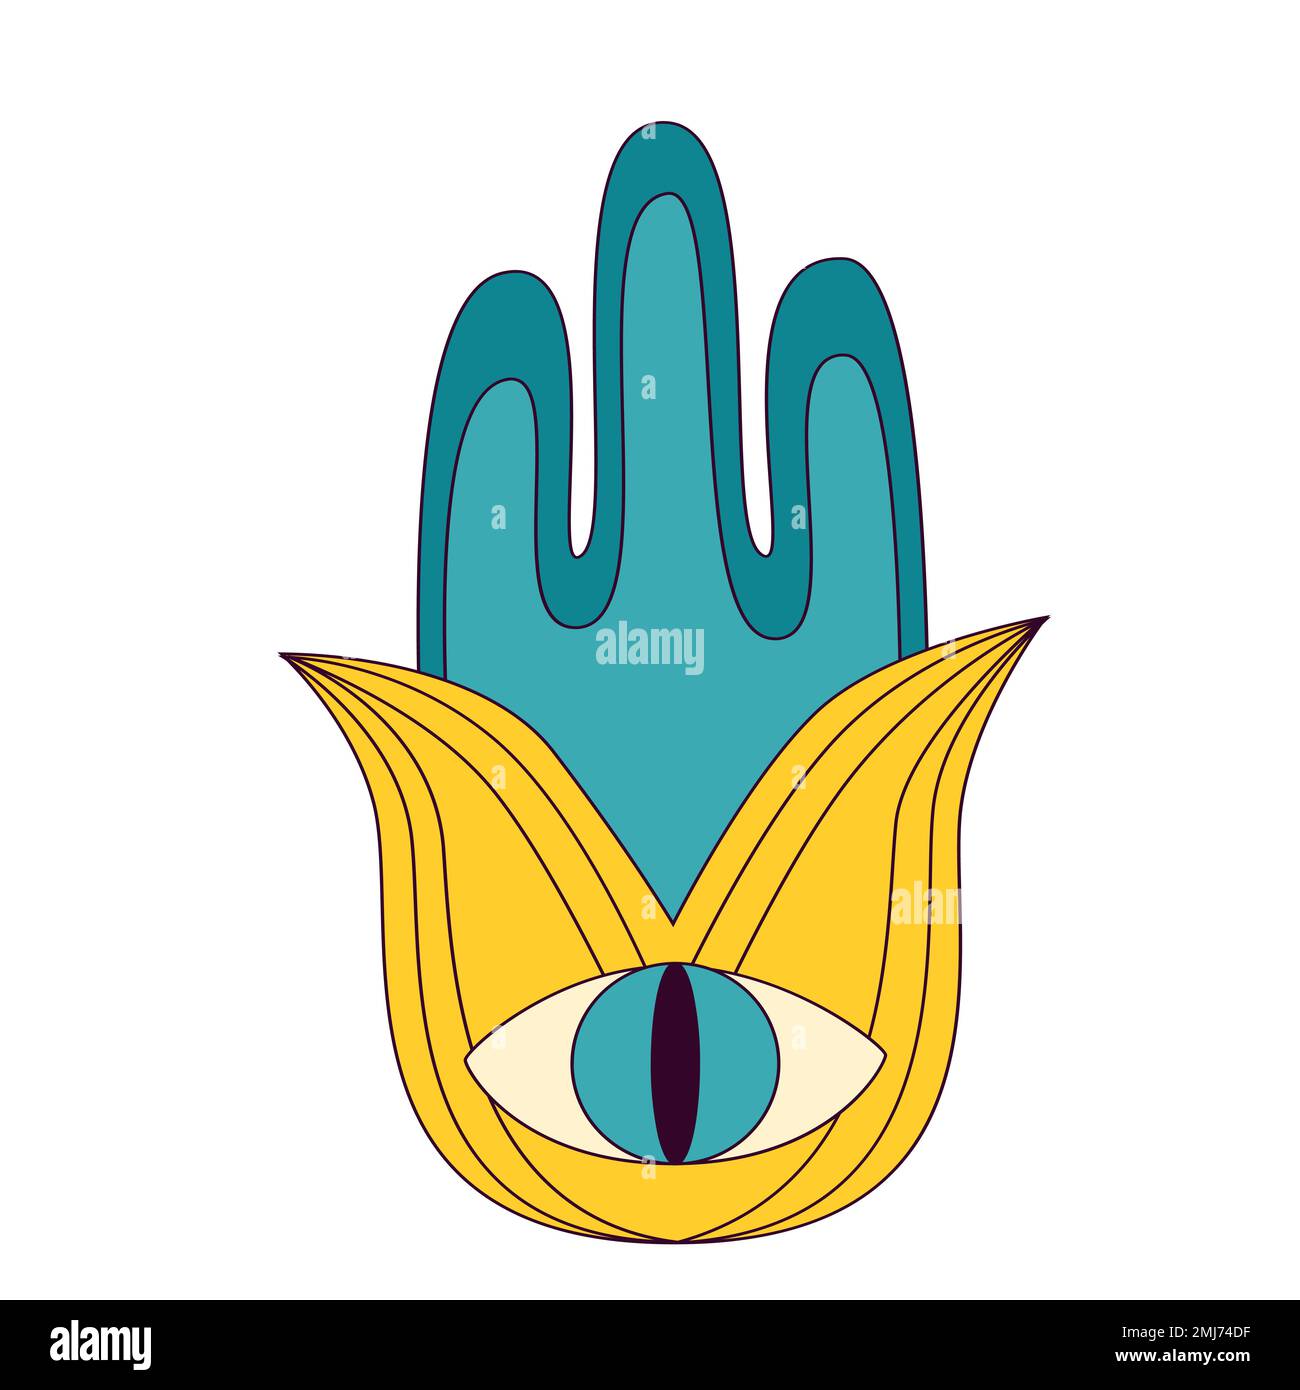 Hamsa hand retro icon. Fatima eye 1970 fantasy abstract style. Ethnic esoteric amulet protecting from evil eye. Indian Arabic or Jewish traditional sy Stock Vector